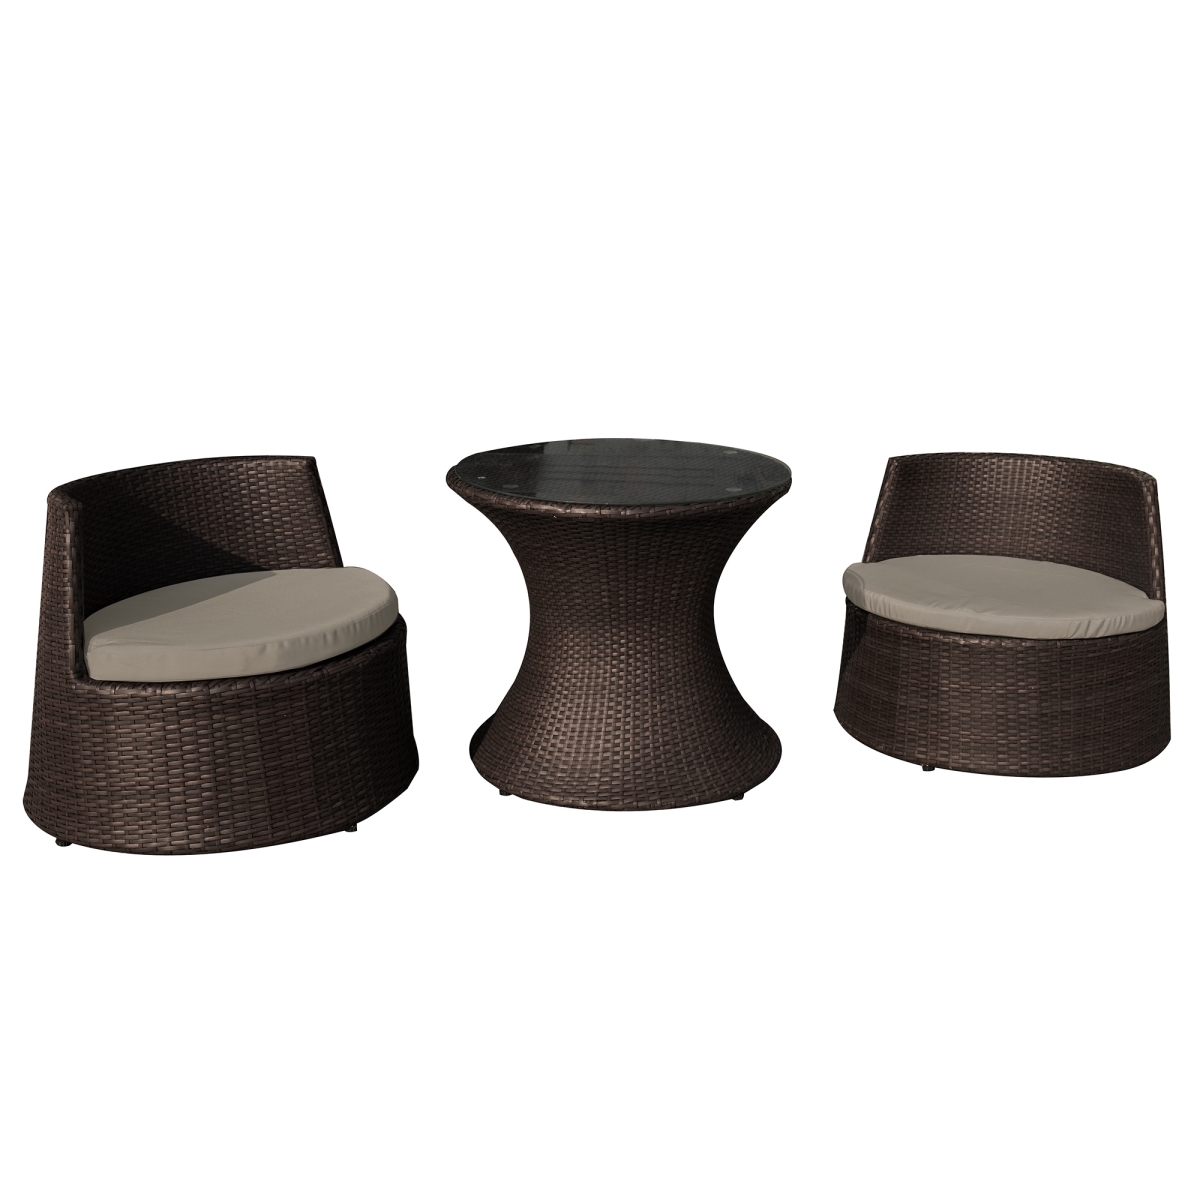 Nu2055 2 Chairs & Table Oasis Outdoor Wicker Chat Set - 3piece